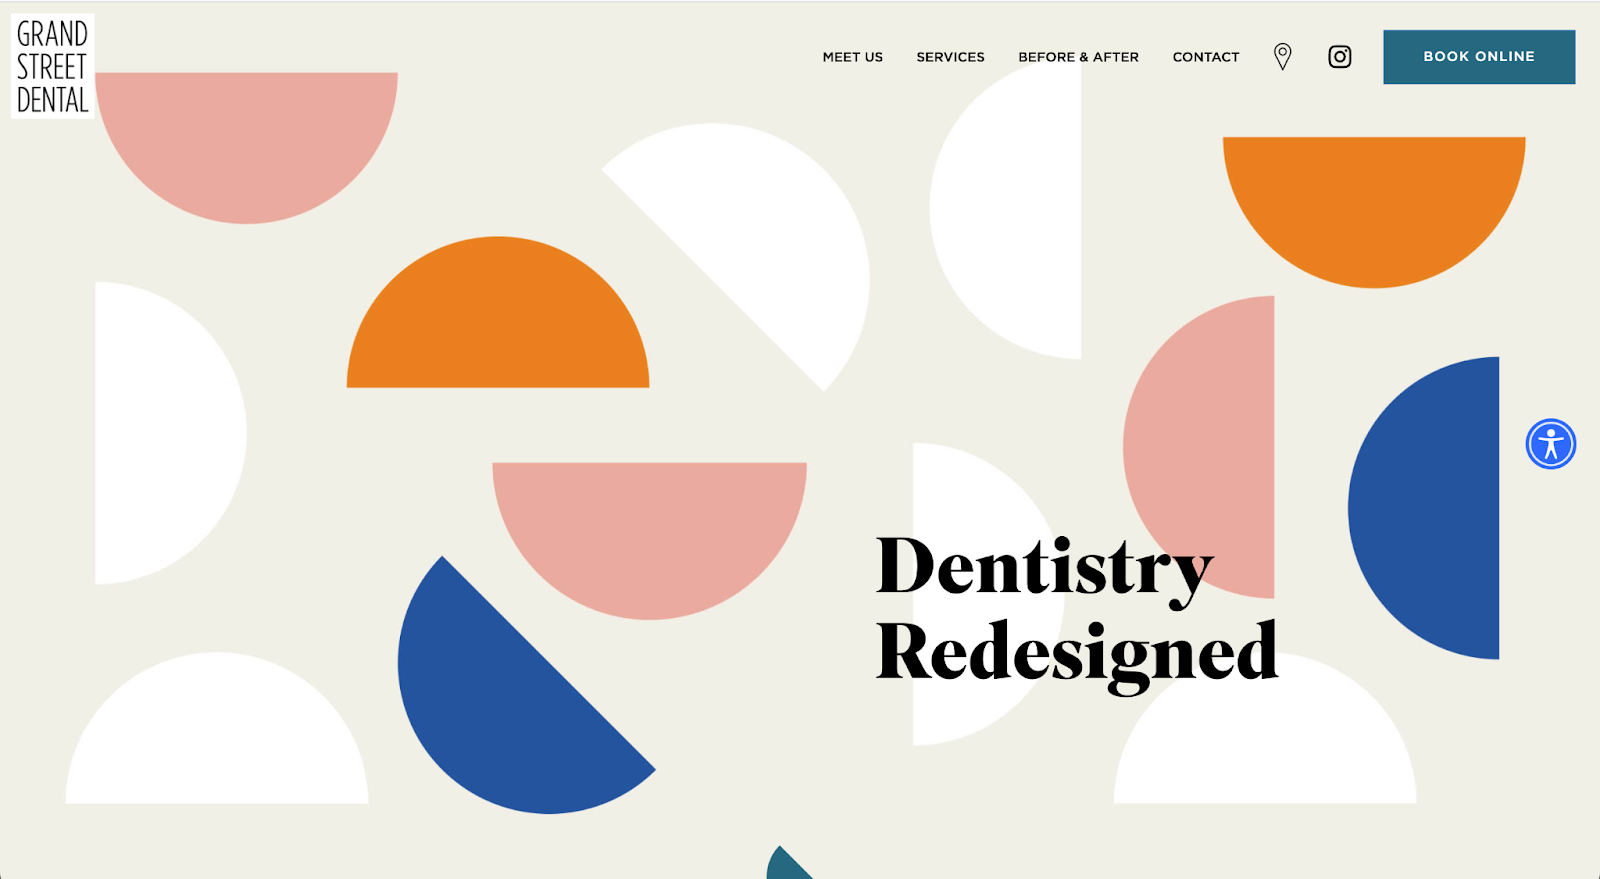 A modern dental website, Grand Street Dental uses an Instagram feel to appeal to new customers